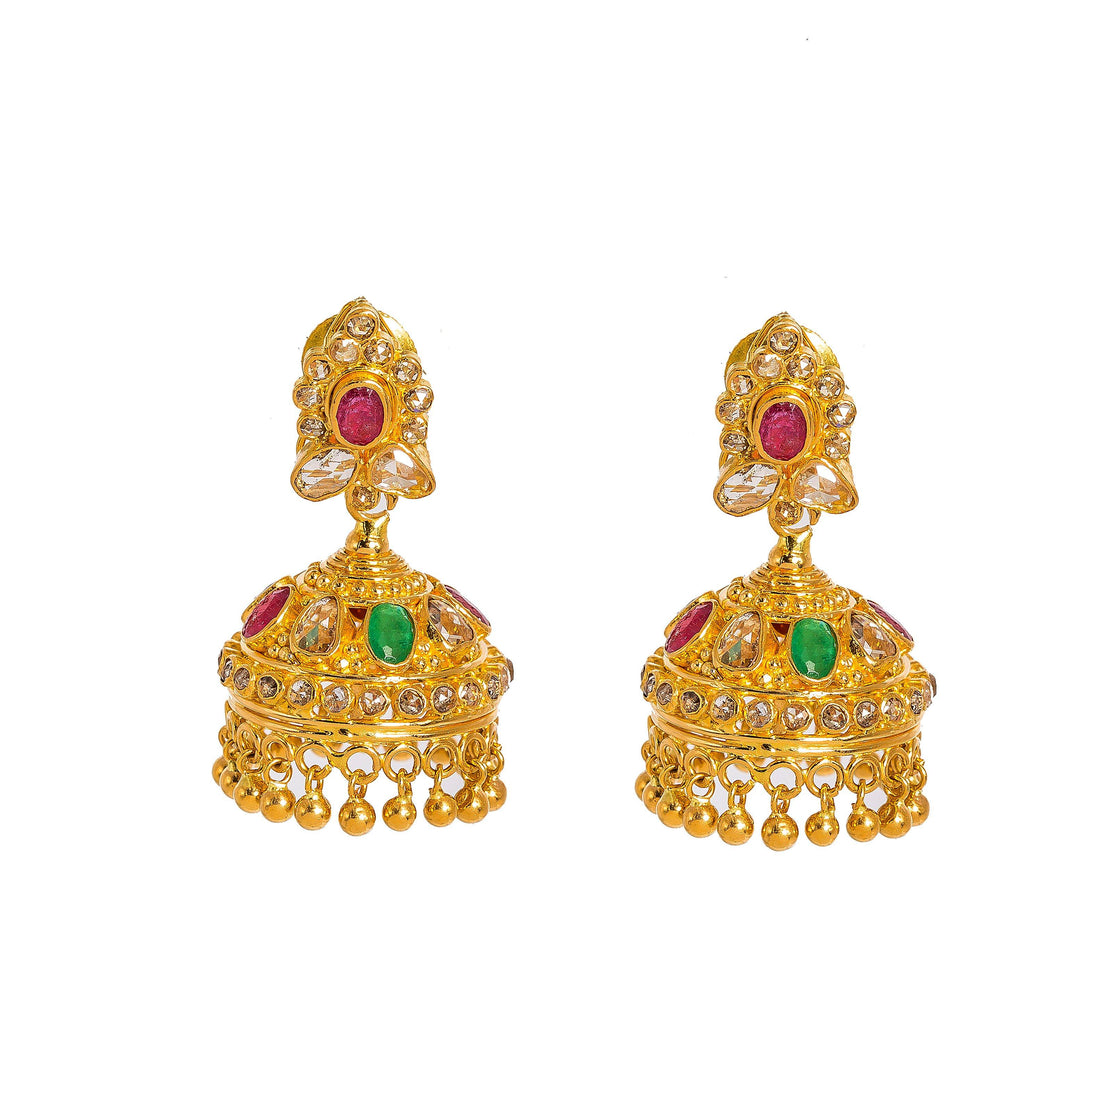 22 Carat Gold Jhumka Price Starting From Rs 40,000/Pc | Find Verified  Sellers at Justdial